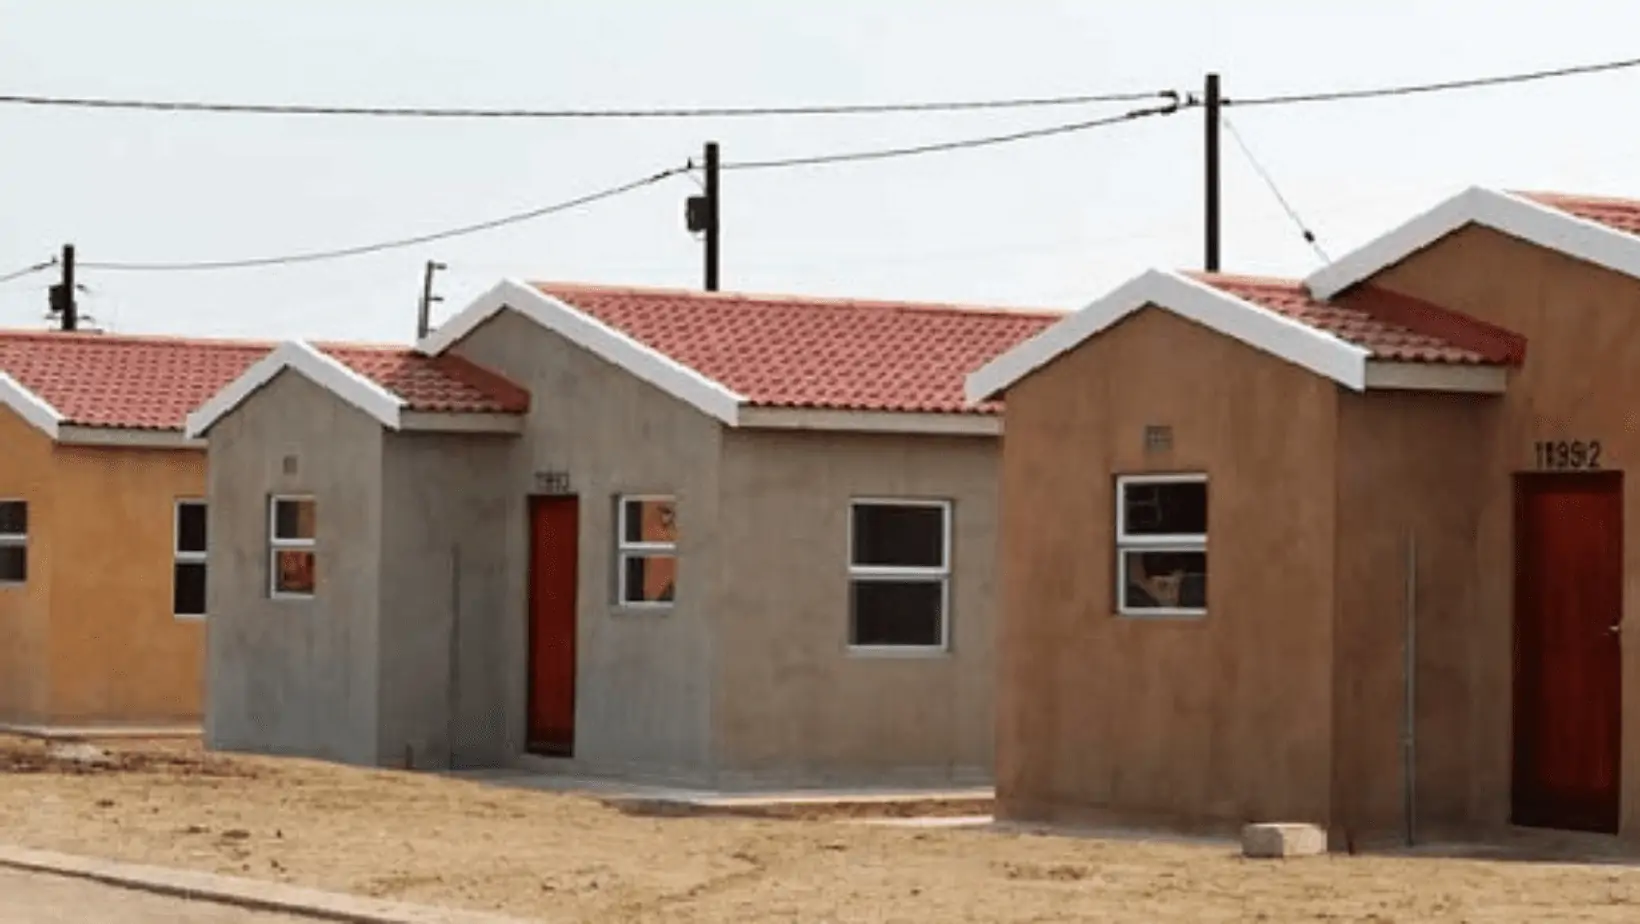 Dignified Housing Triumph: Western Cape’s Resilient Infrastructure Progress